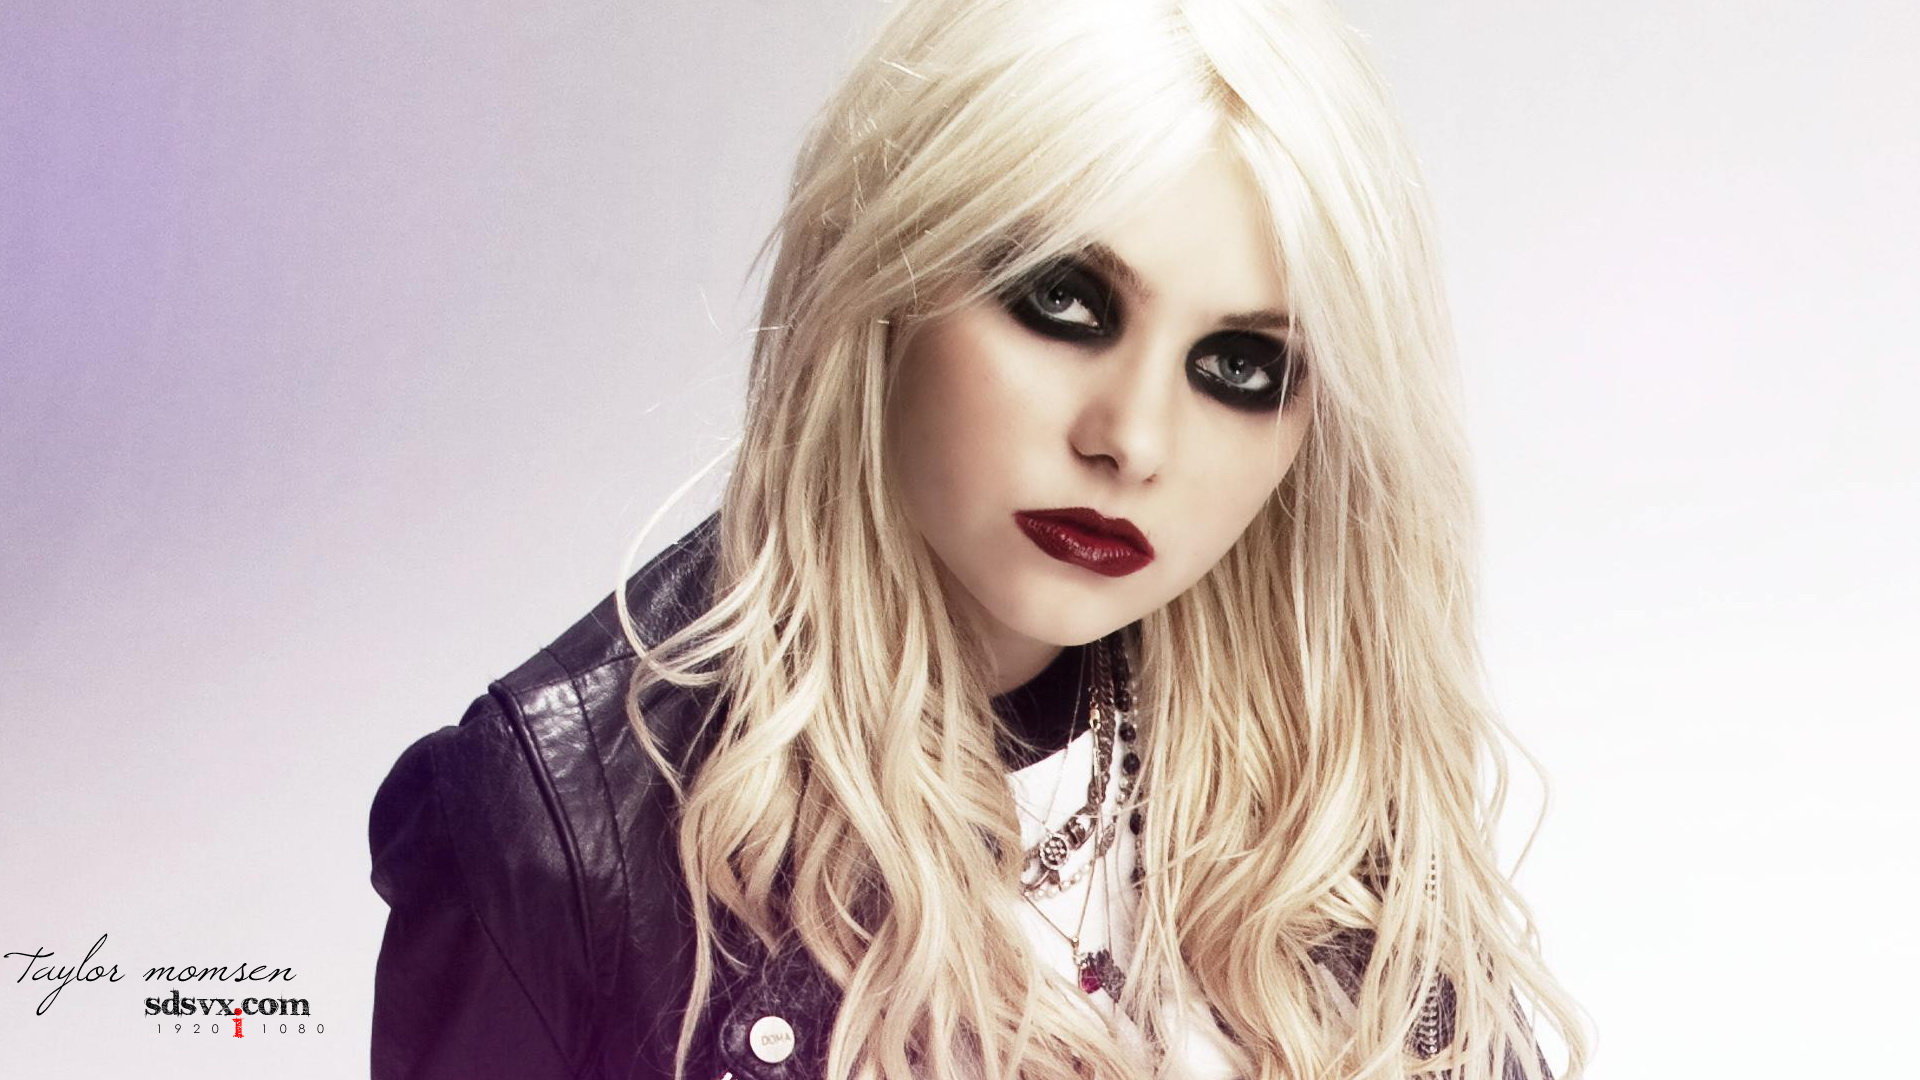 High resolution Taylor Momsen full hd 1920x1080 background ID:244181 for PC